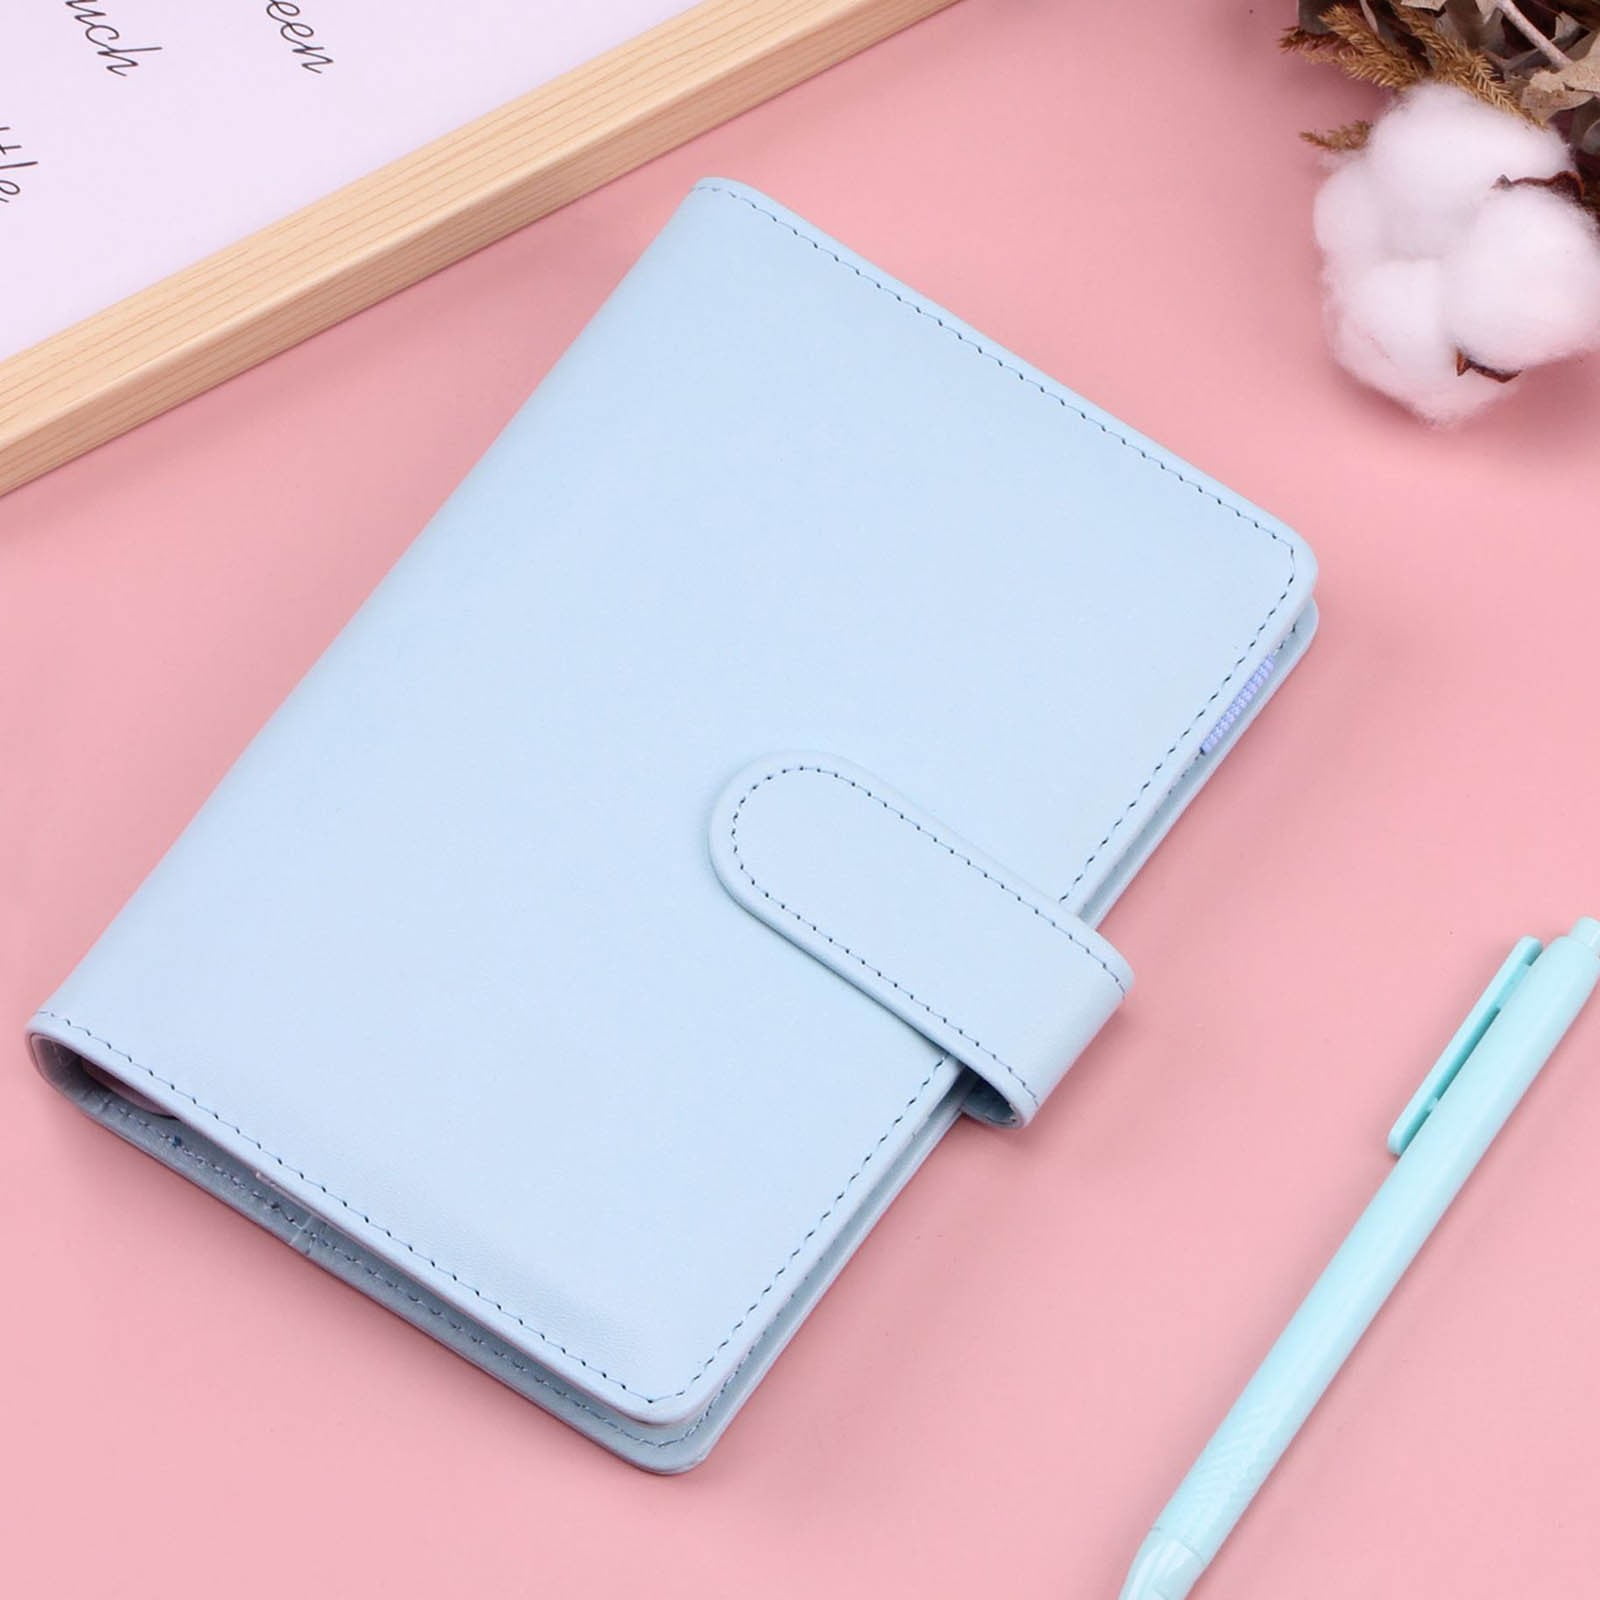 Apepal A6 PU Leather Notebook Binder, Binder Refillable Paper With ...